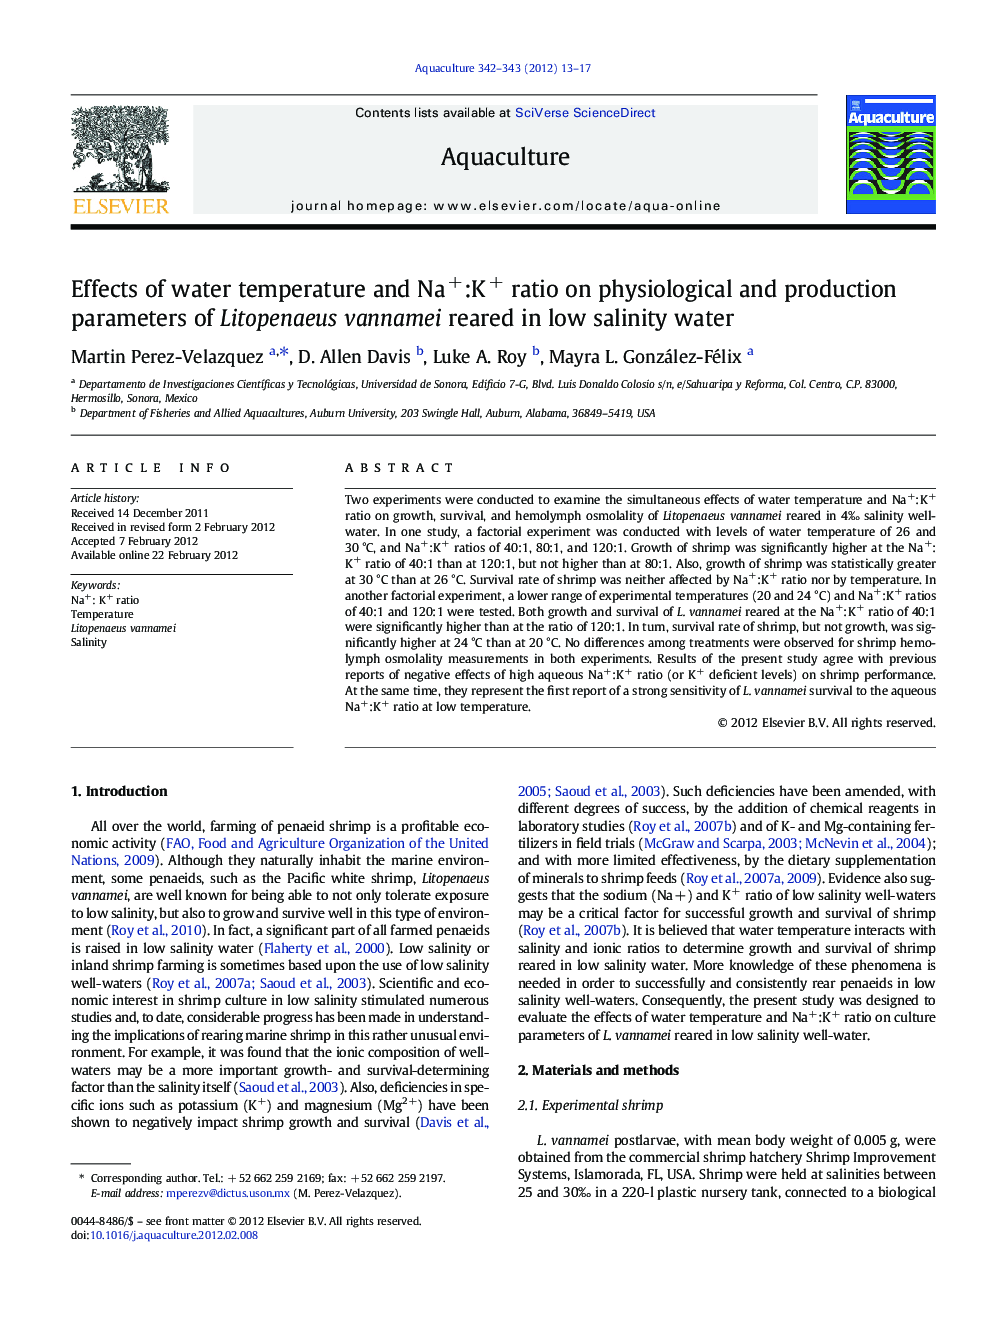 Effects of water temperature and Na+:K+ ratio on physiological and production parameters of Litopenaeus vannamei reared in low salinity water